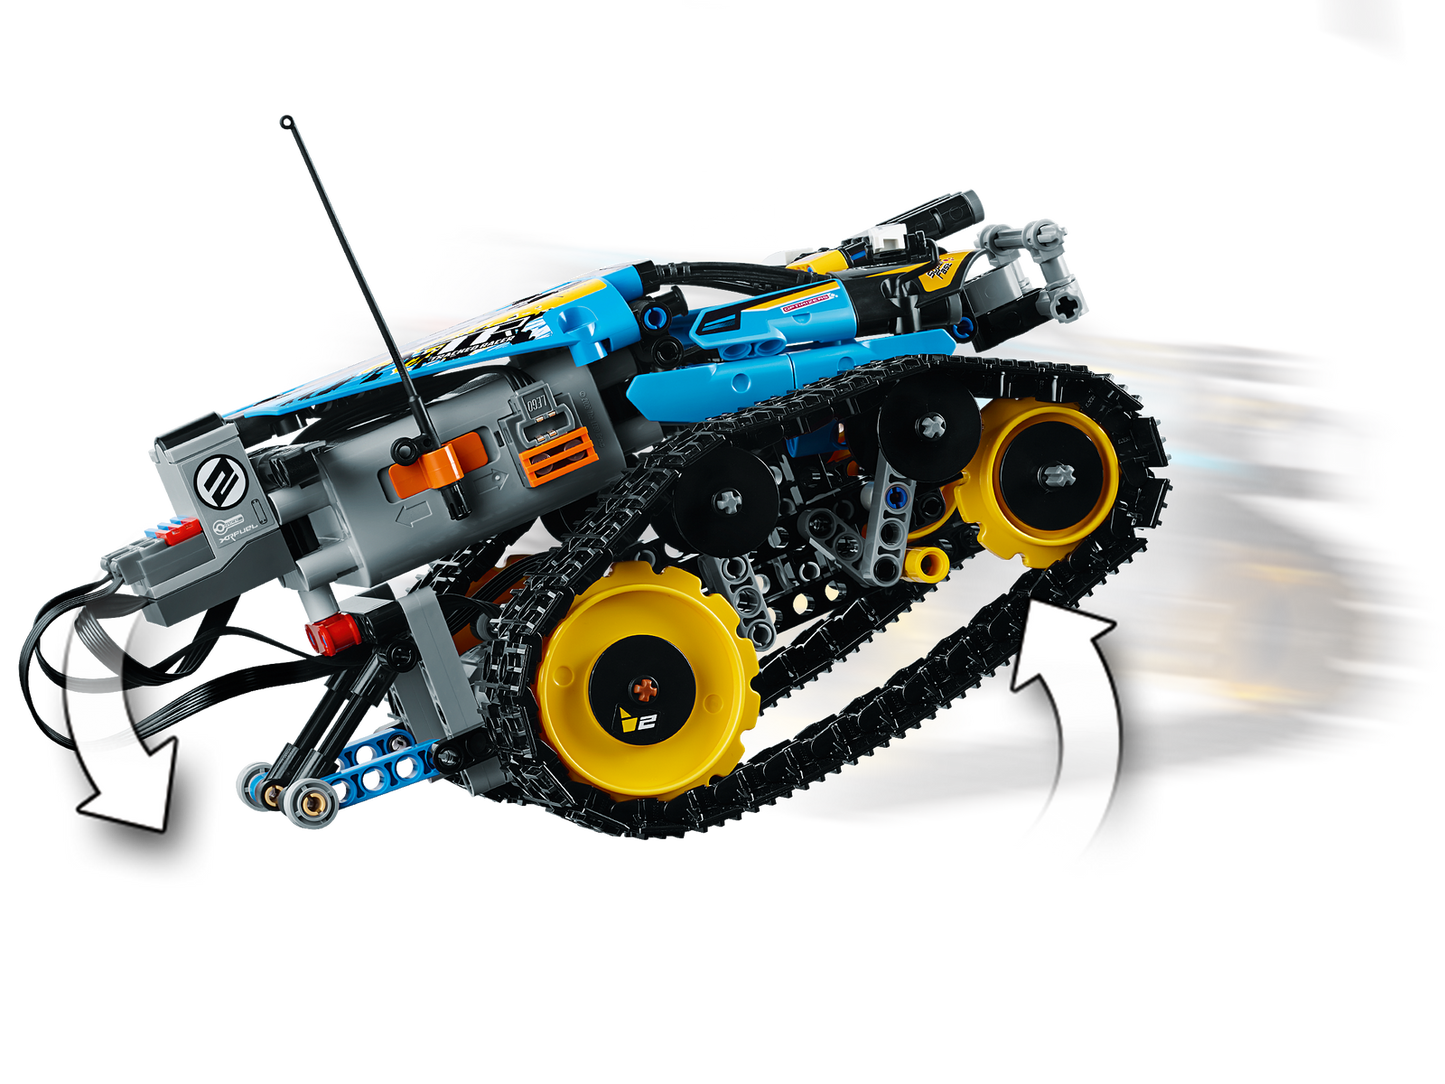 Lego Technic Remote-Controlled Stunt Racer 42095